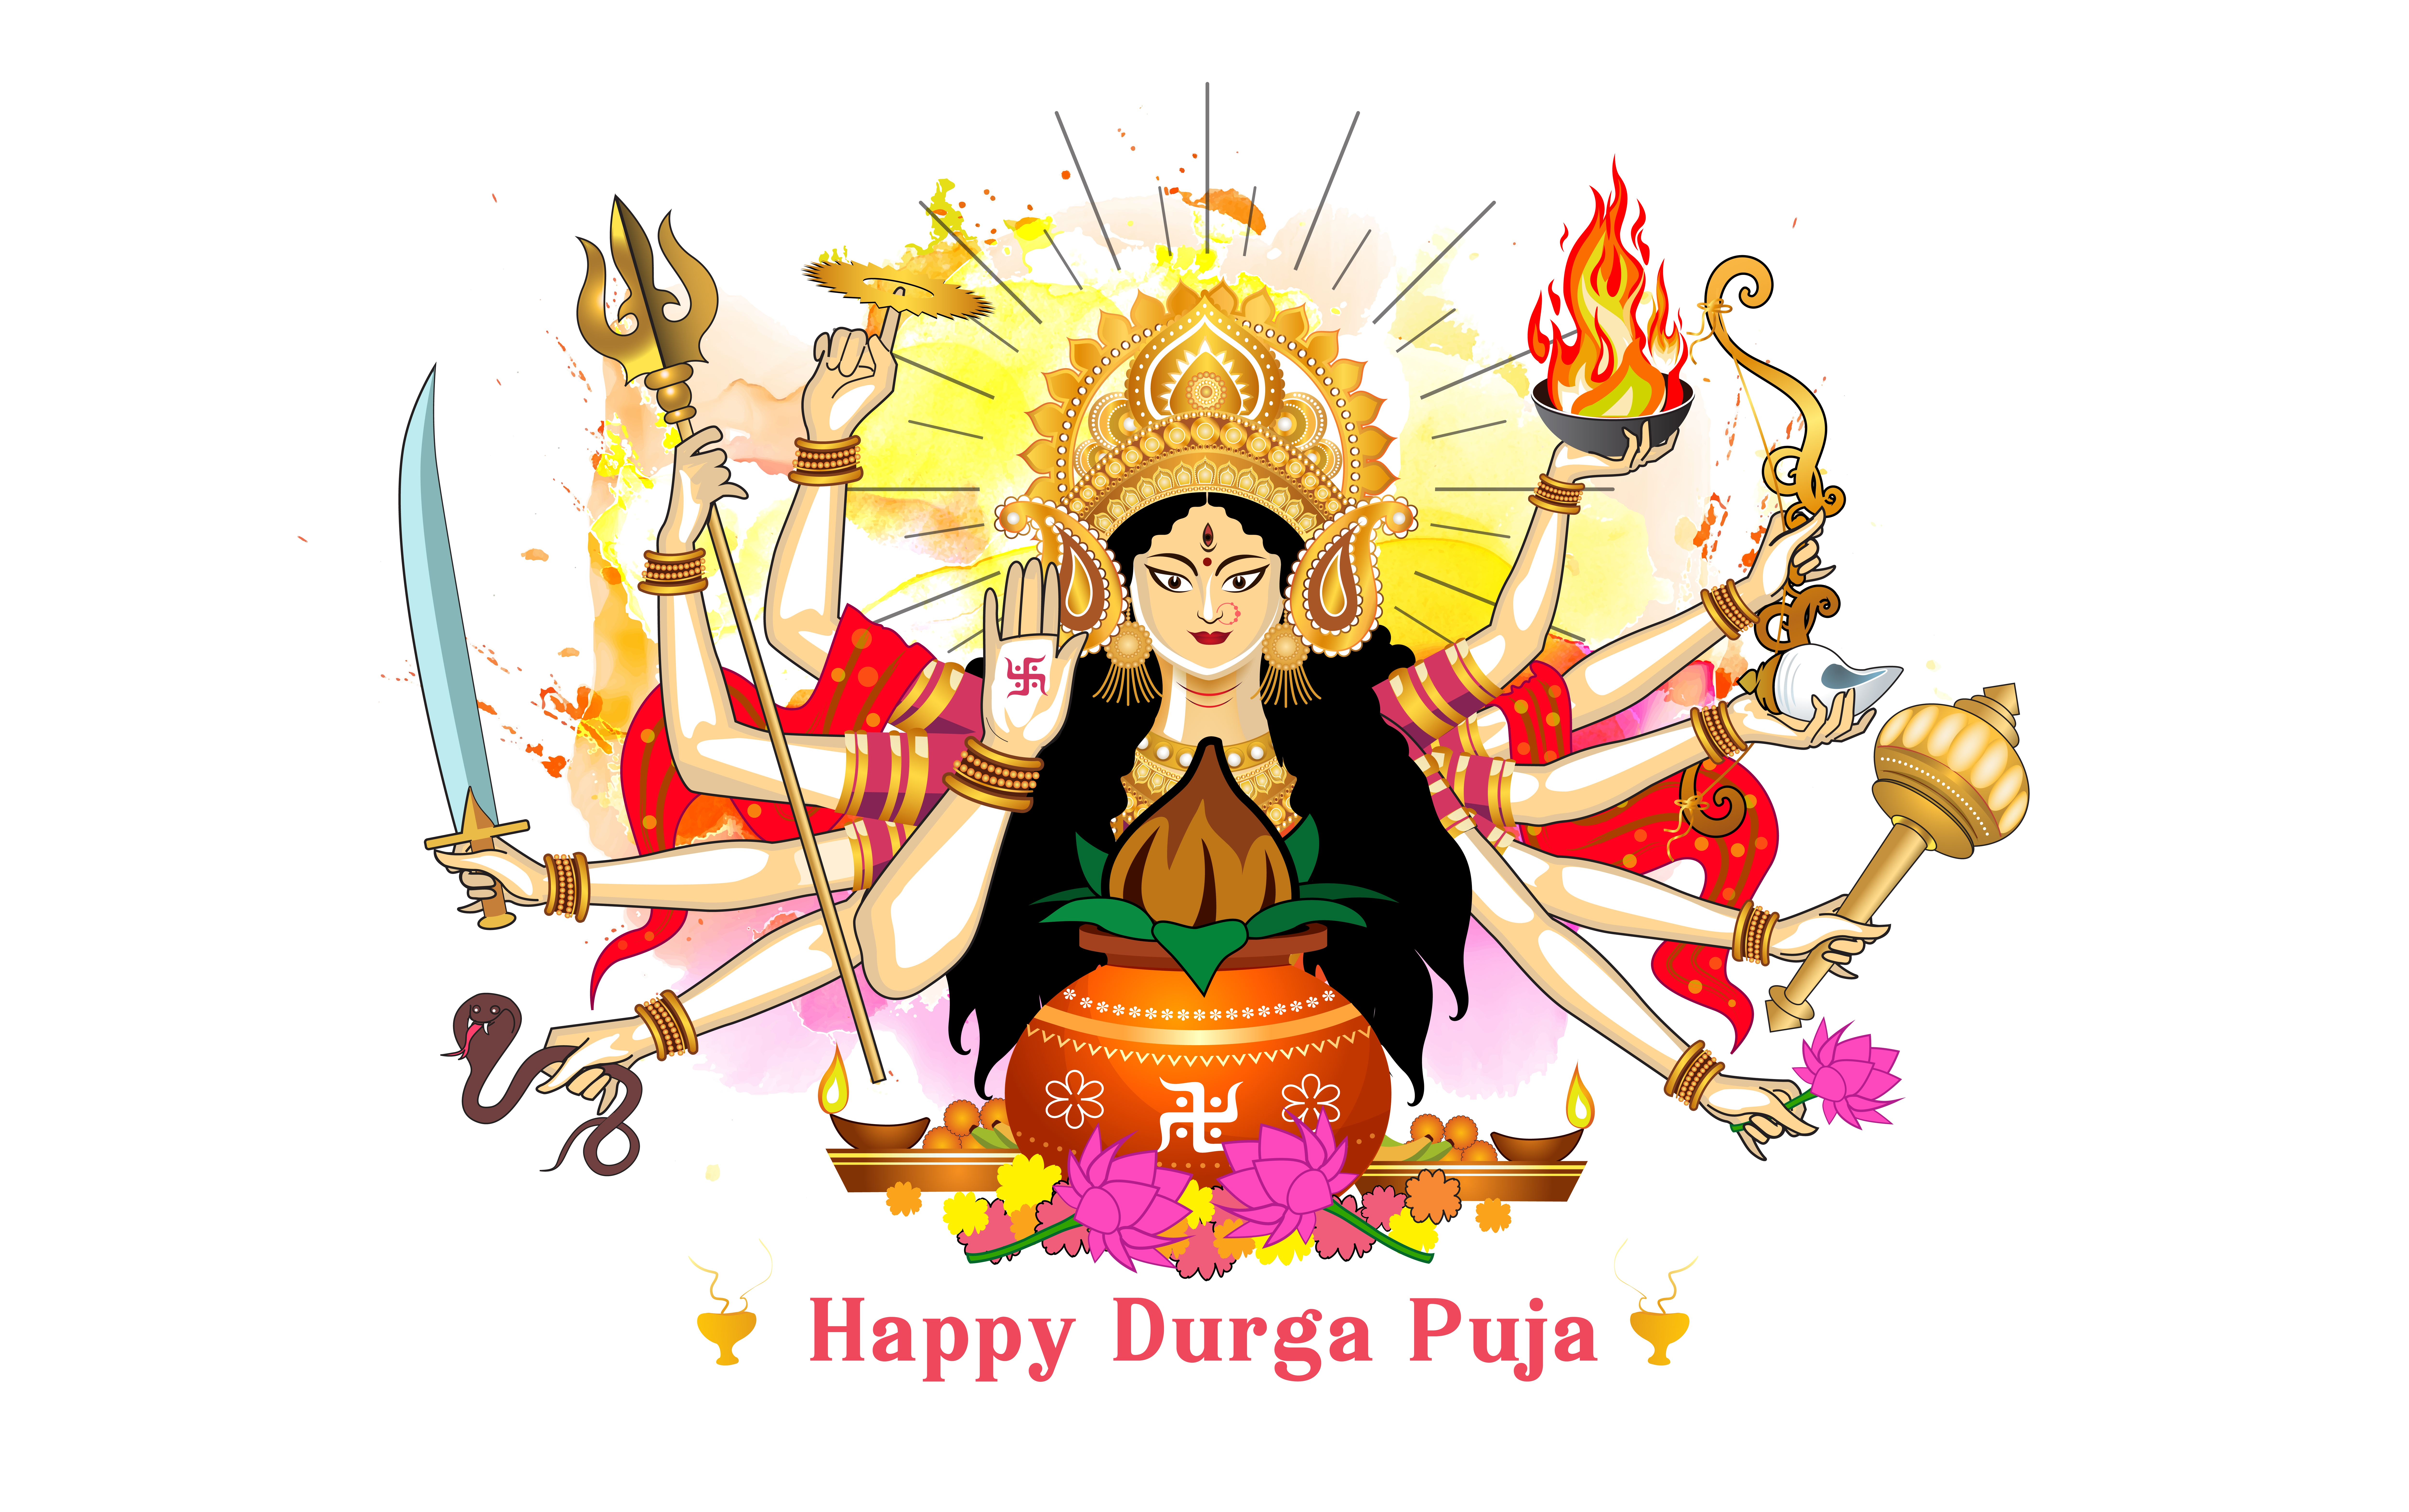 Happy Durga Ashtami 2022: Wishes Images, Quotes, Photos, Pics, Facebook SMS and Messages to share with your loved ones. (Image: Shutterstock) 